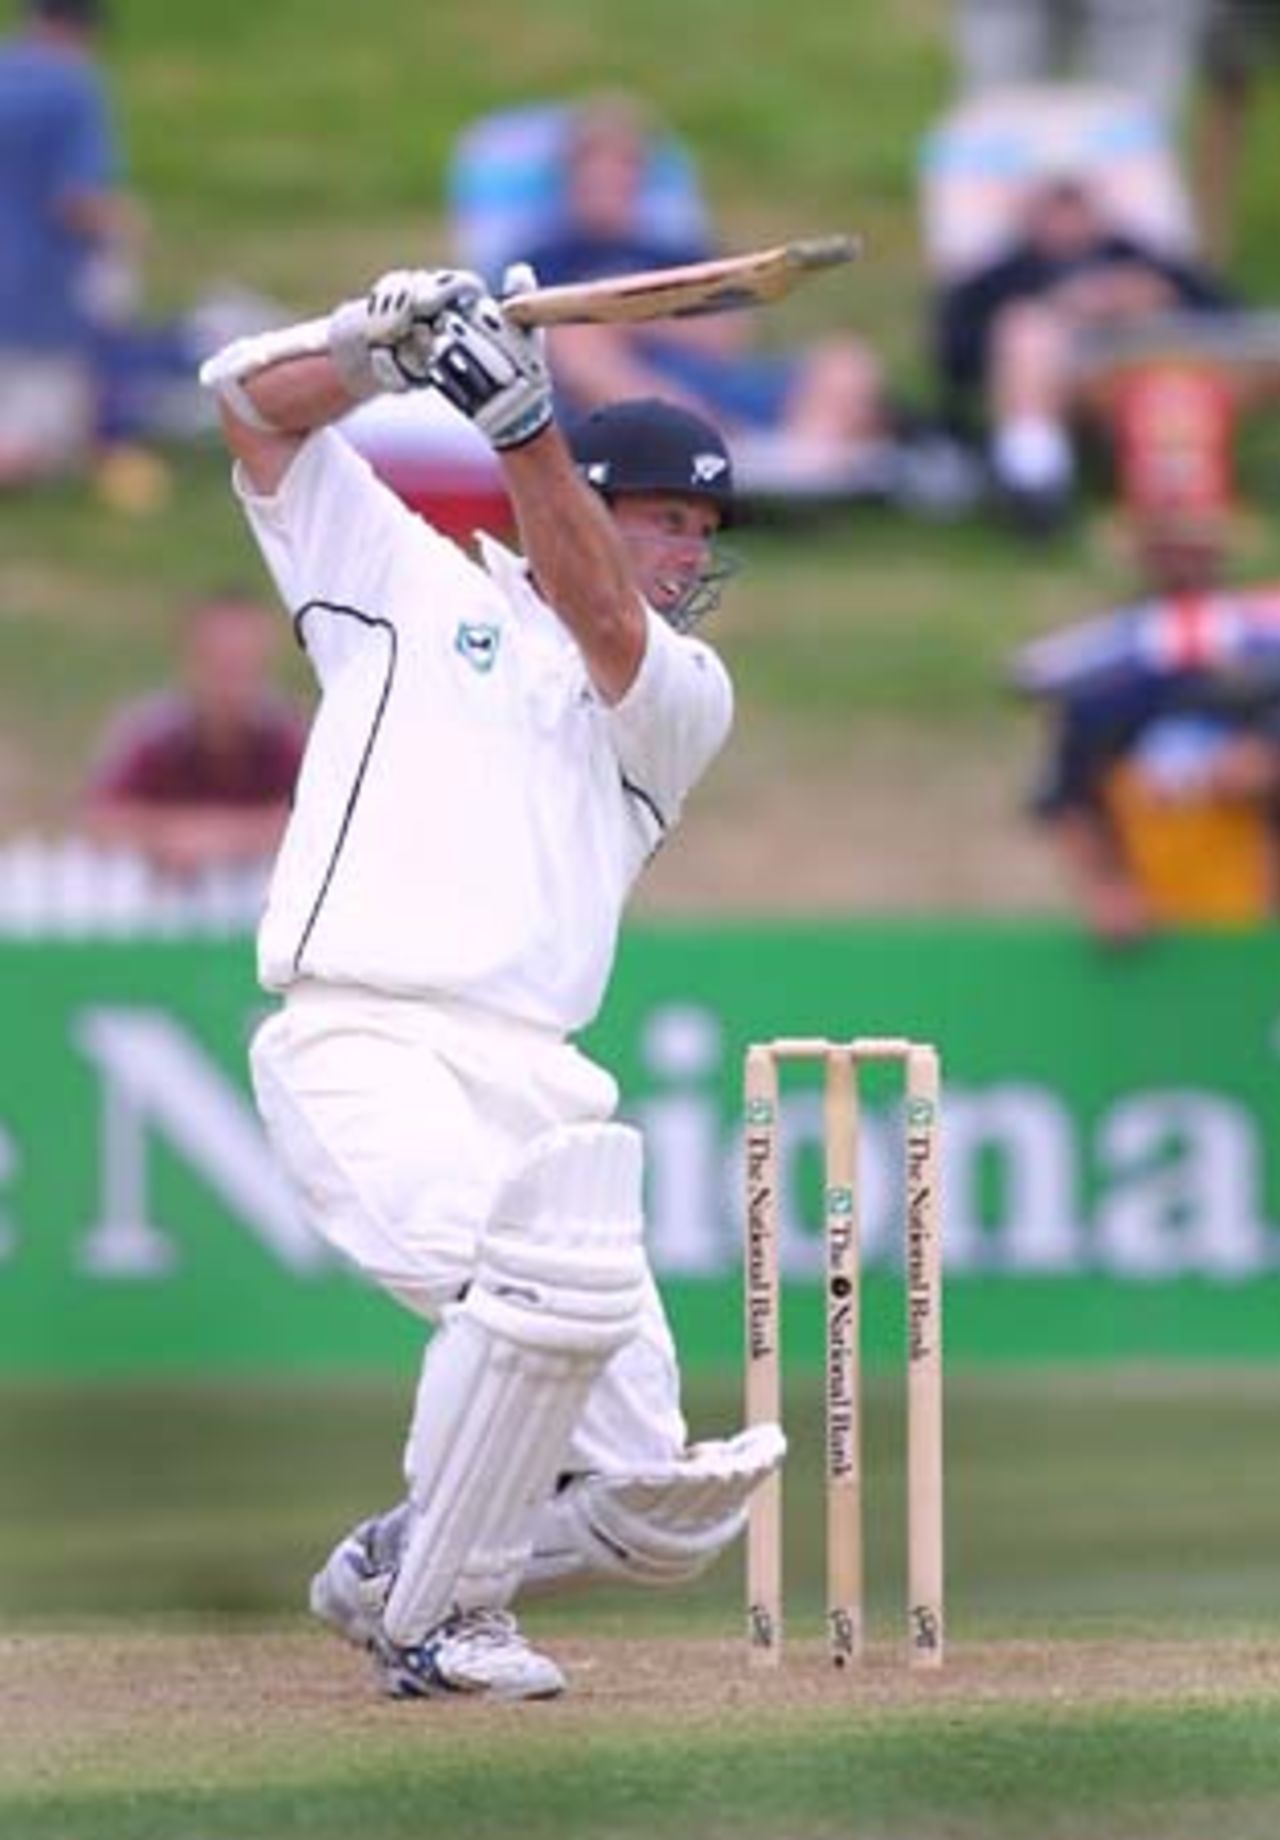 New Zealand opening batsman Mark Richardson square drives a ball during his first innings. Richardson ended the first day's play on 64 not out, his seventh half century in just his ninth Test. 3rd Test: New Zealand v Pakistan at WestpacTrust Park, Hamilton, 27-31 March 2001 (Day 1).